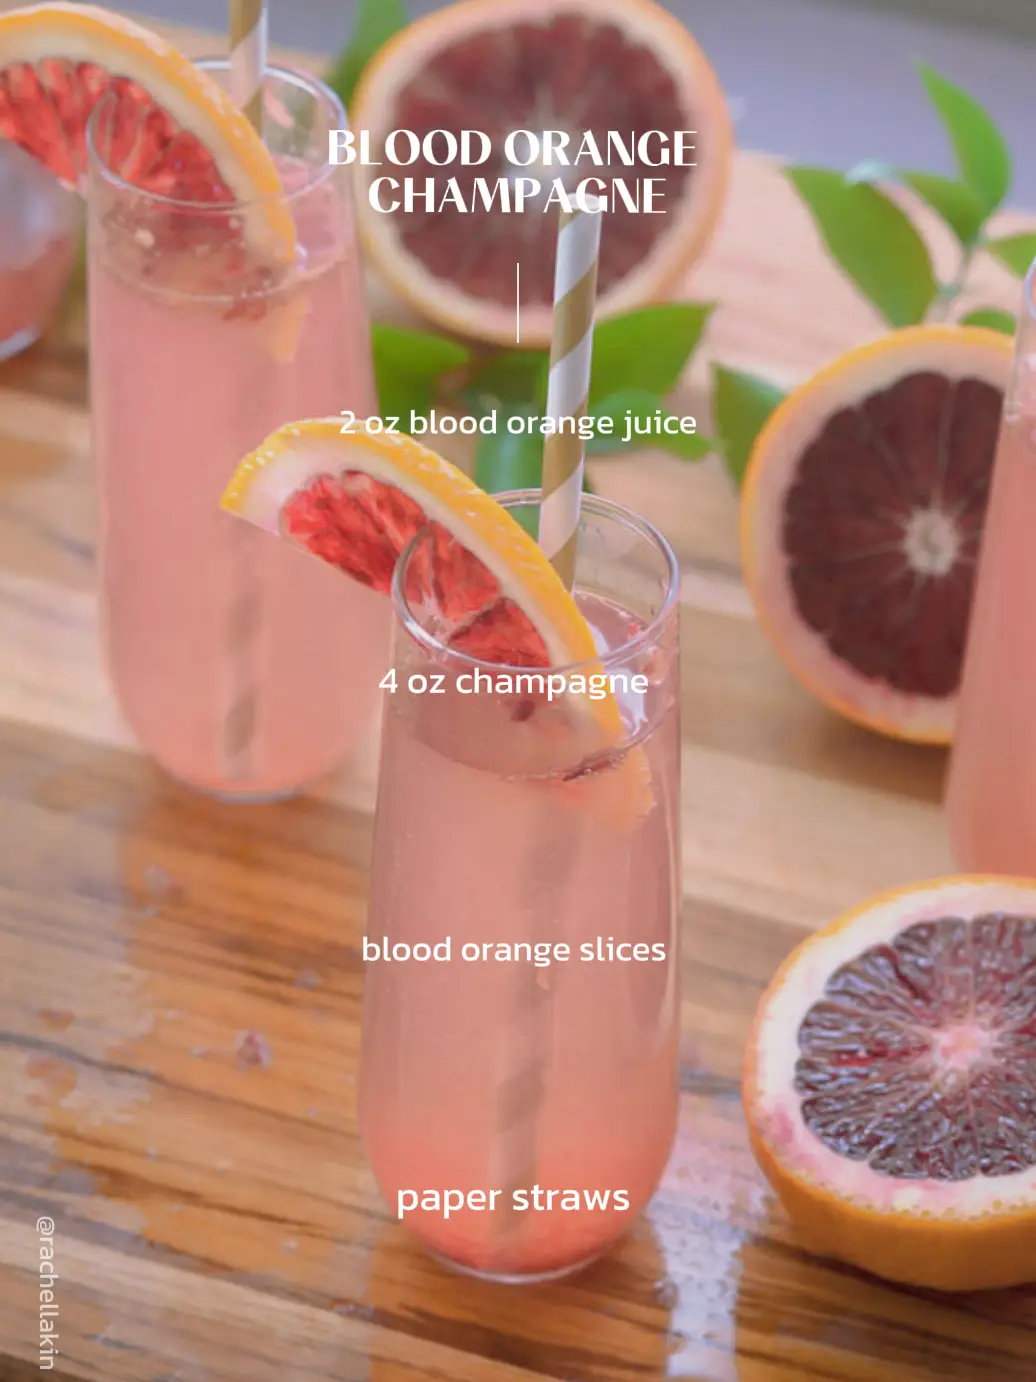  A bottle of champagne and two blood orange slices are displayed.